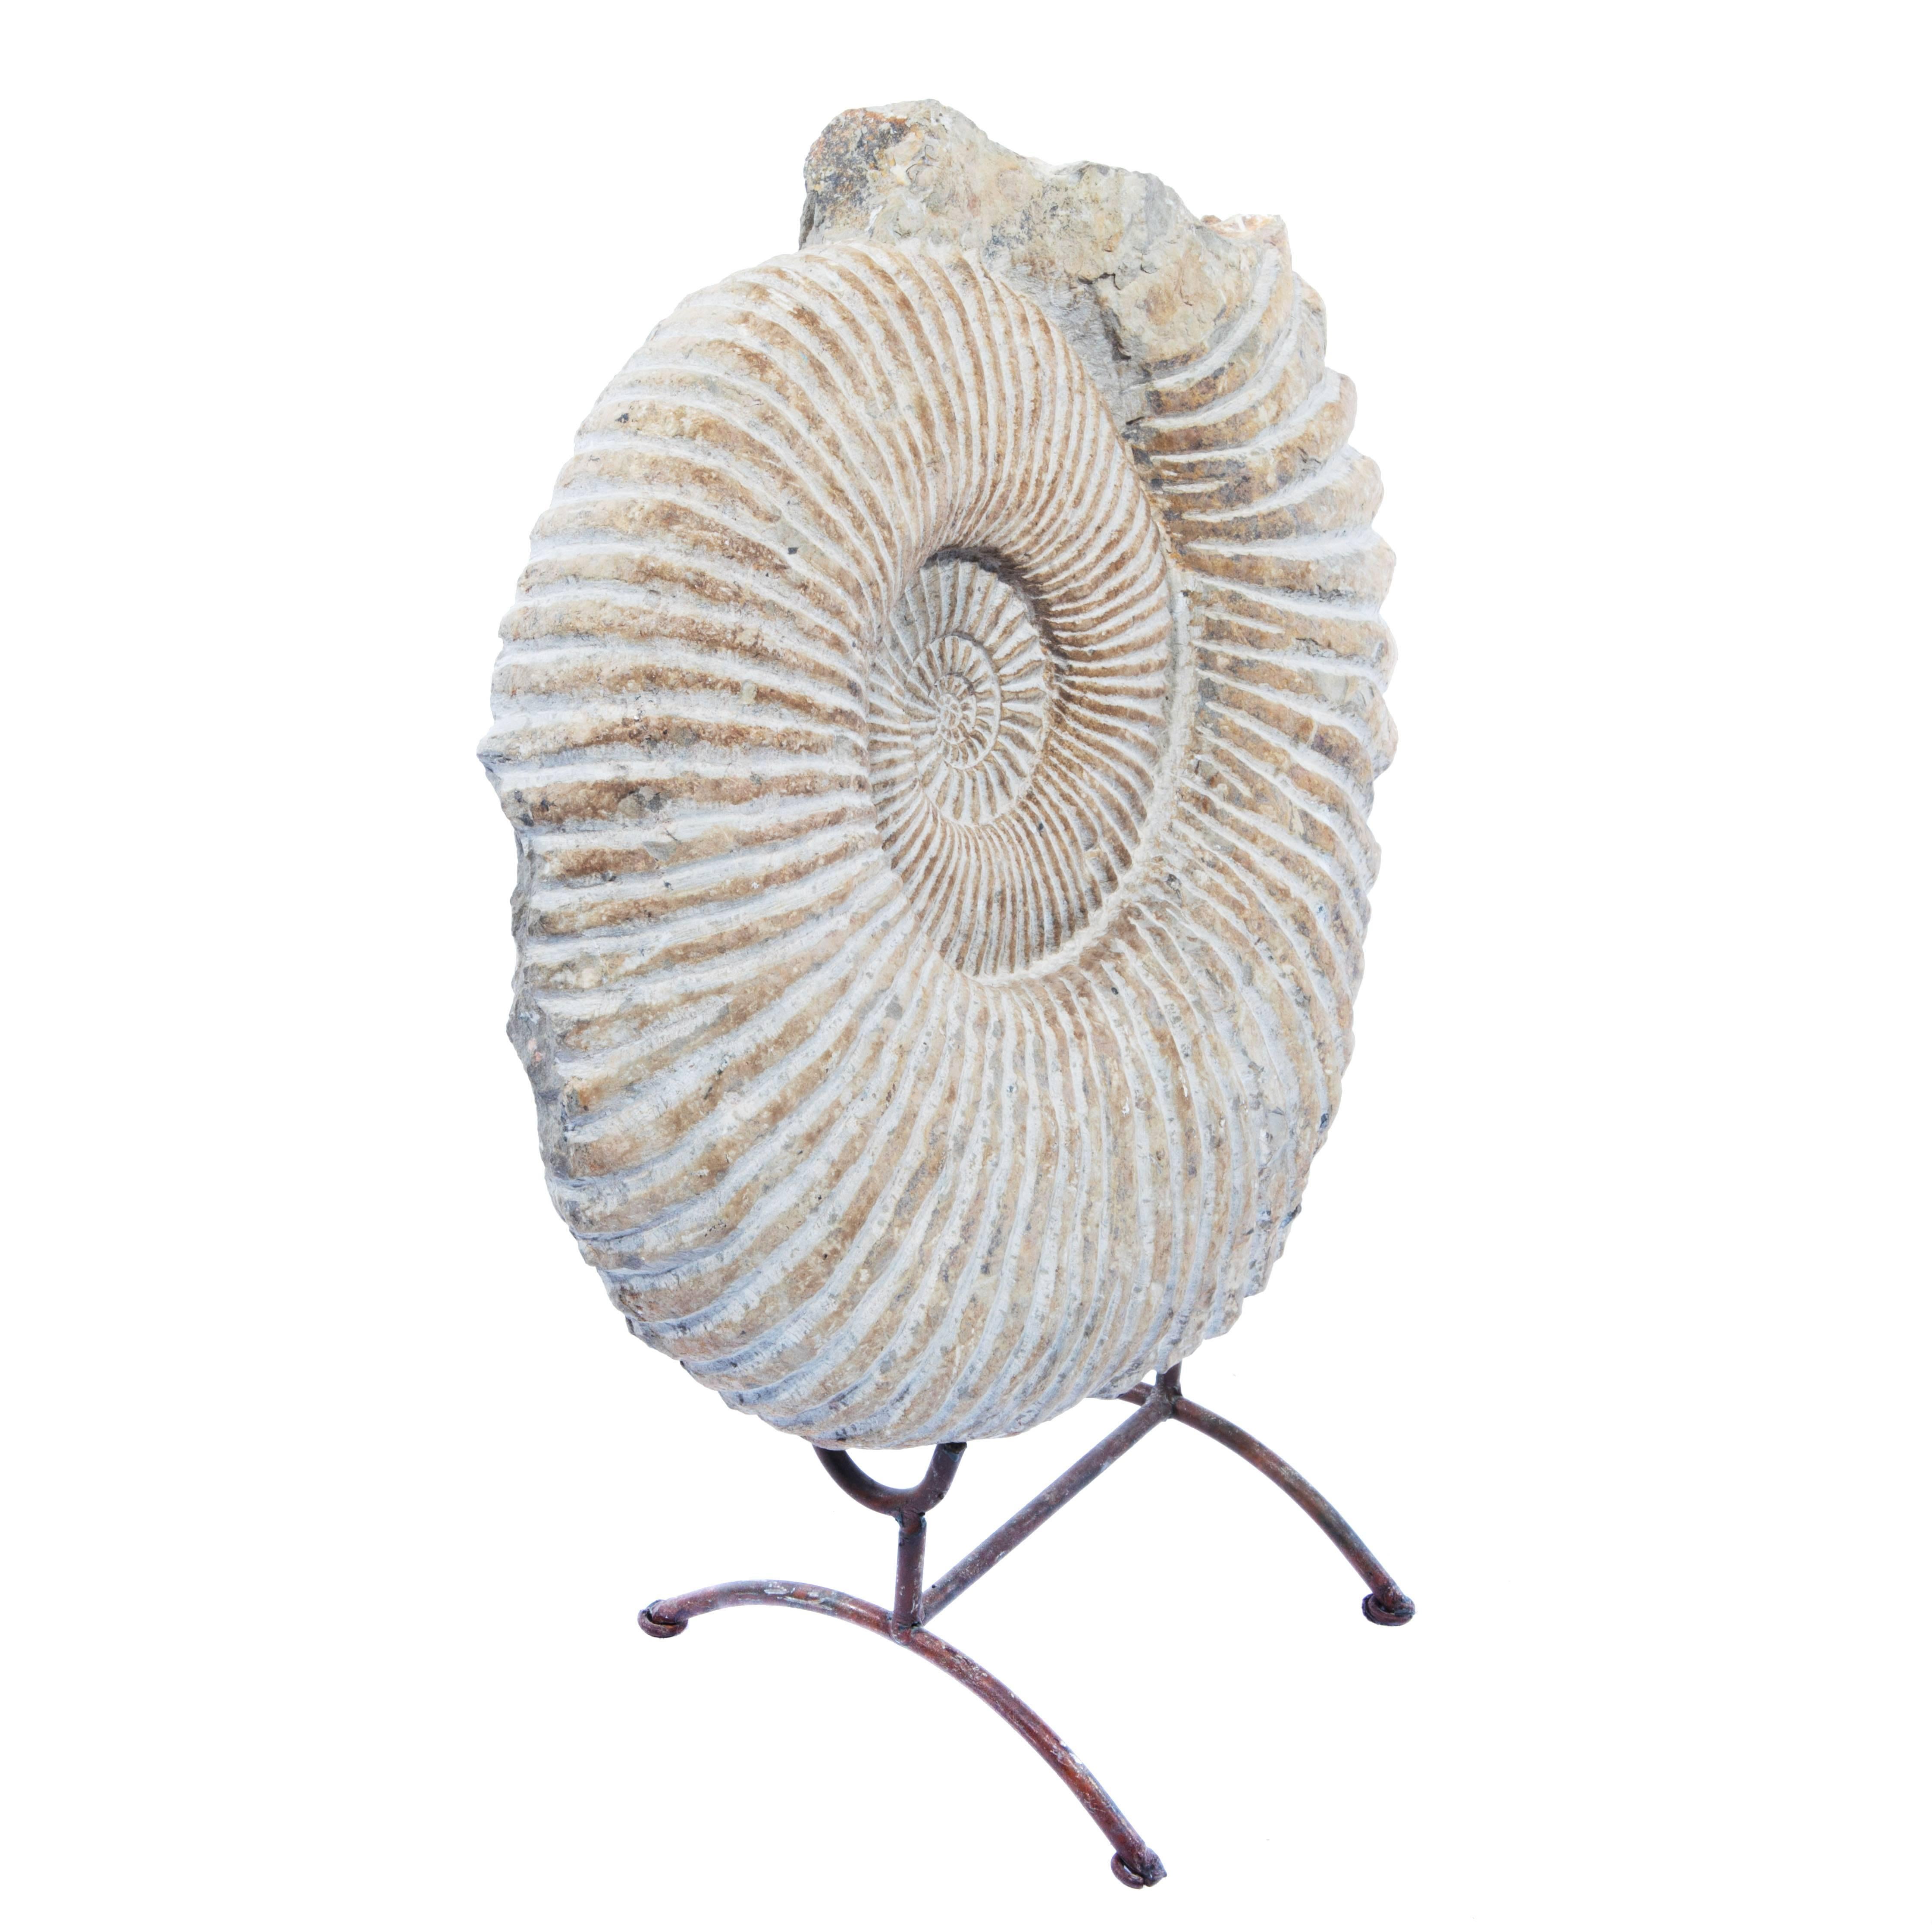 Large Ammonite Fossil on Stand (Granit)